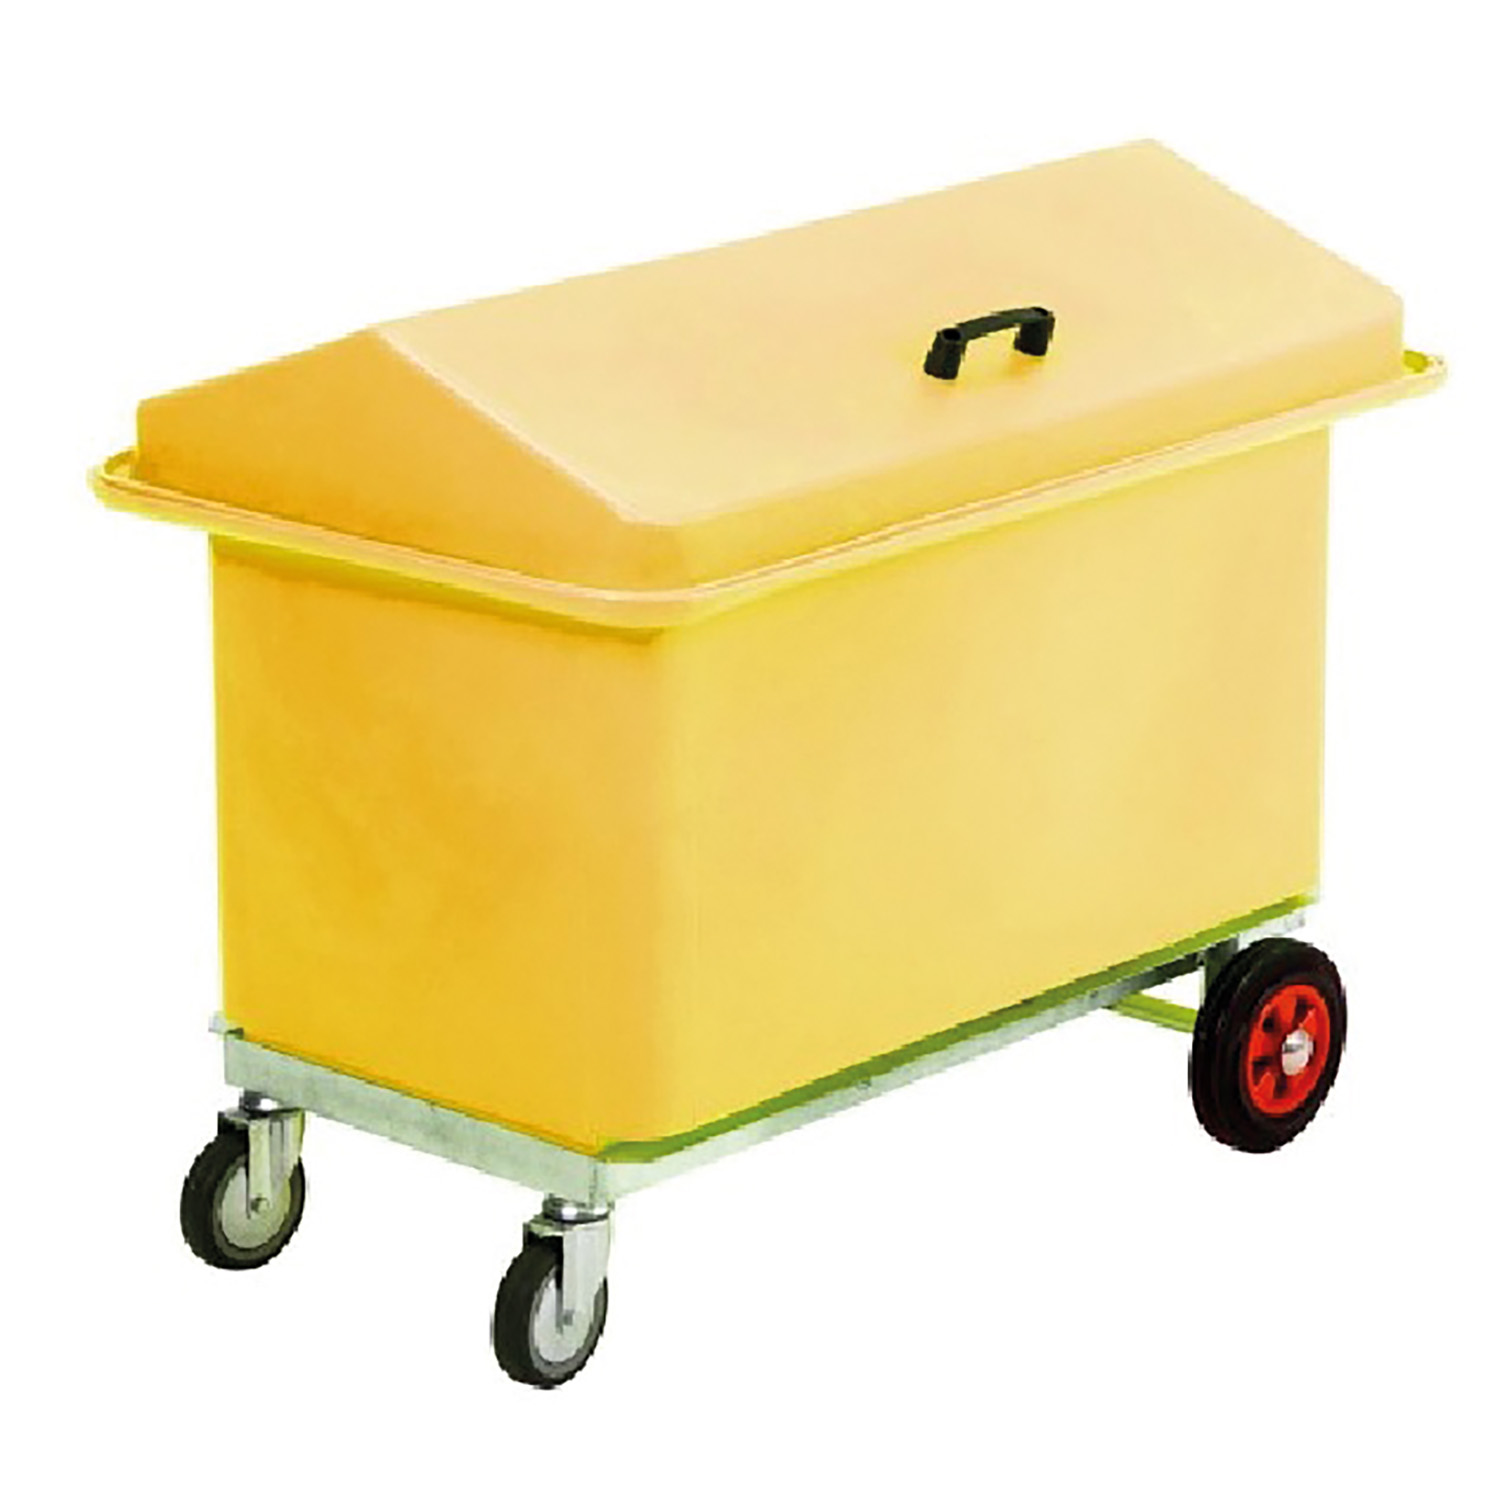 STUBBS MOBILE CHEST TWO COMPARTMENTS S58425 YELLOW TWO COMPARTMENT MOBILE